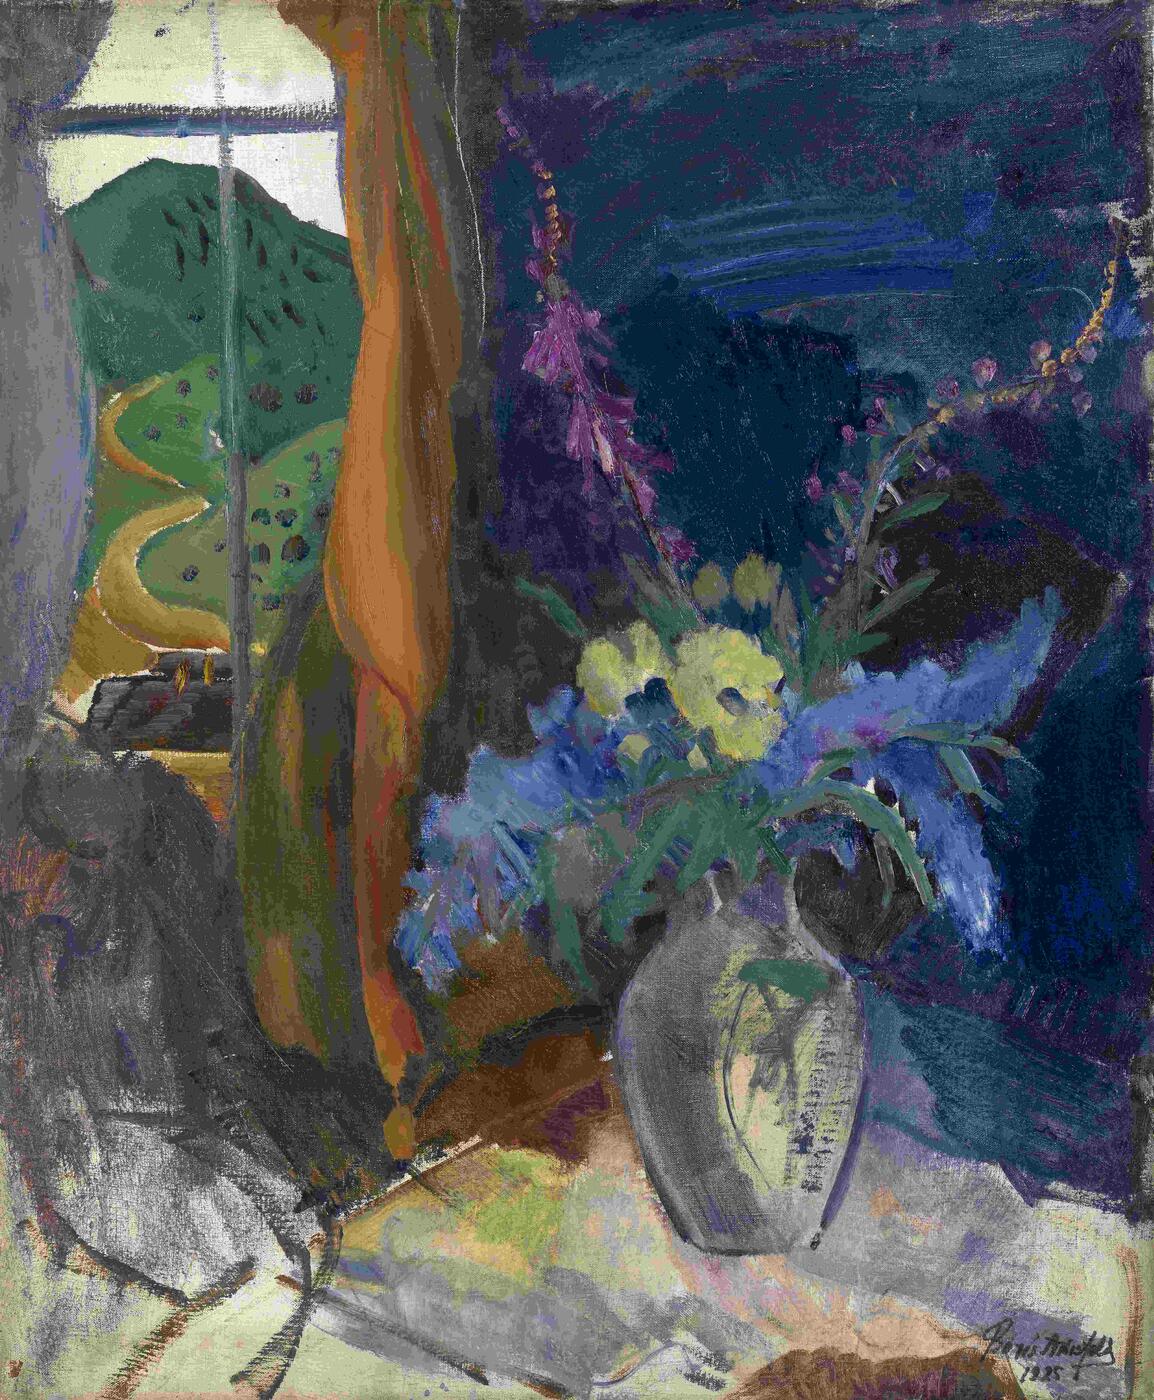 Still Life with Flowers by the Window